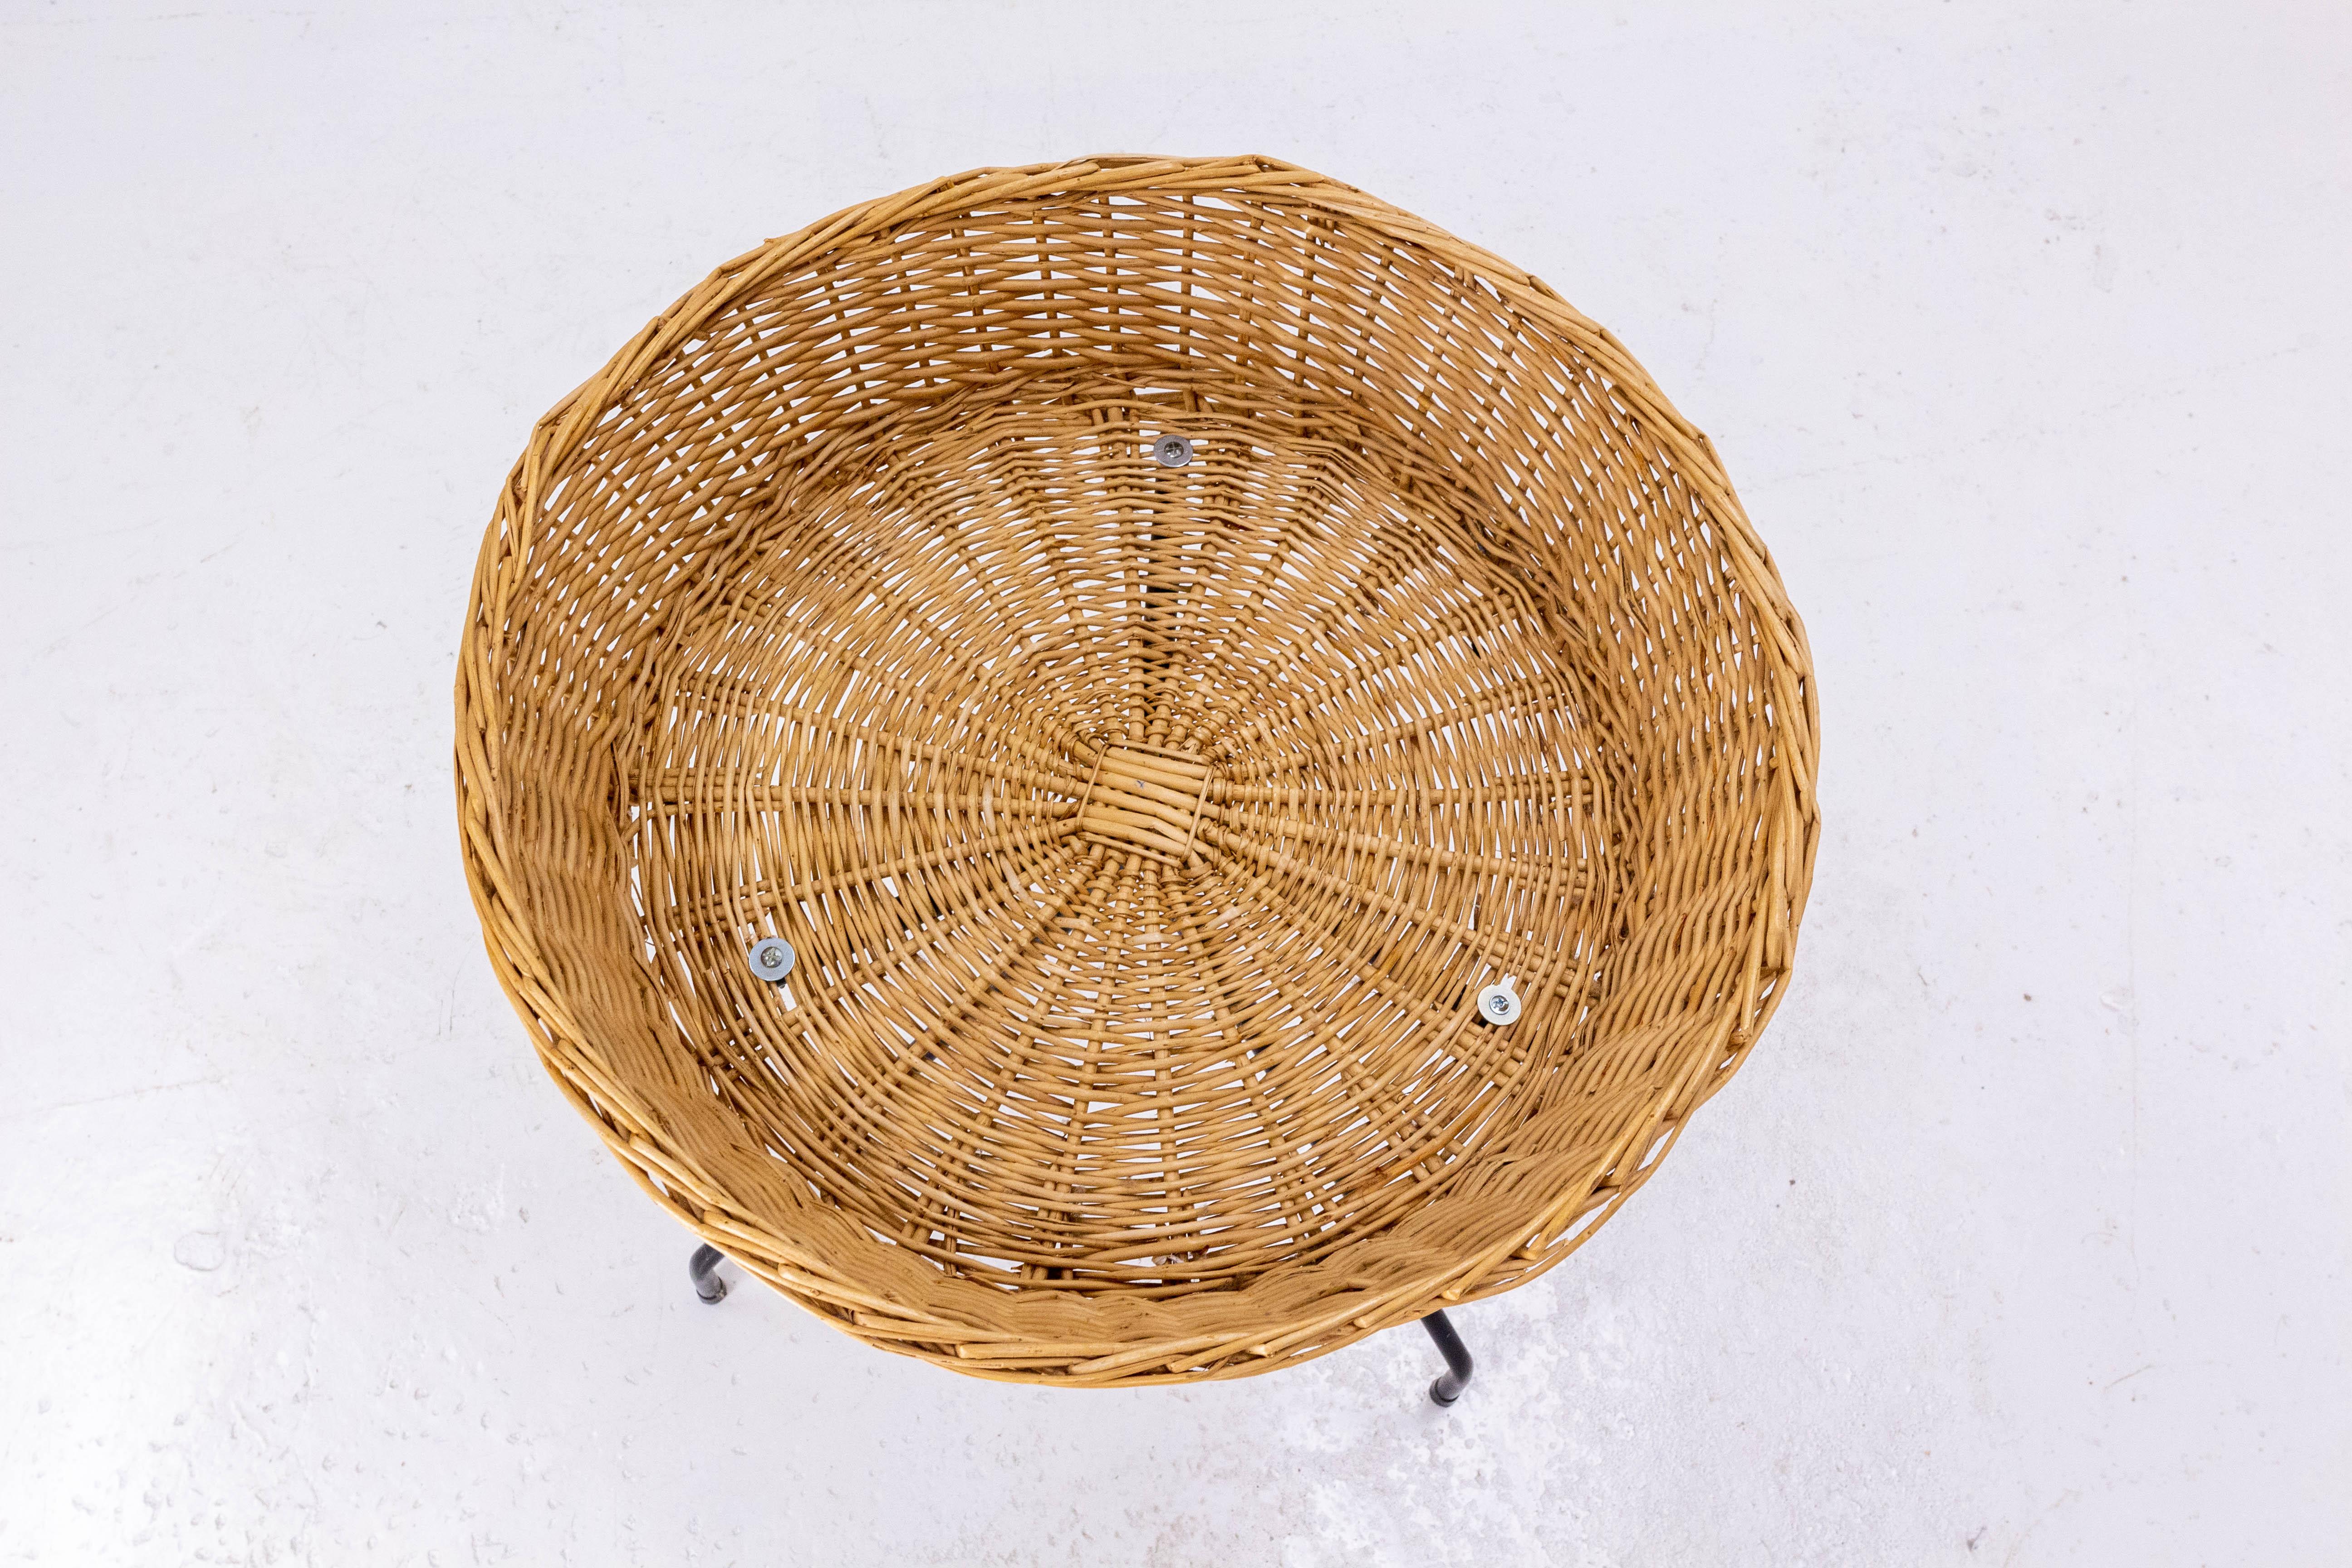 Mid-Century Modern French Rattan Basket Stand Iron Legs Midcentury For Sale